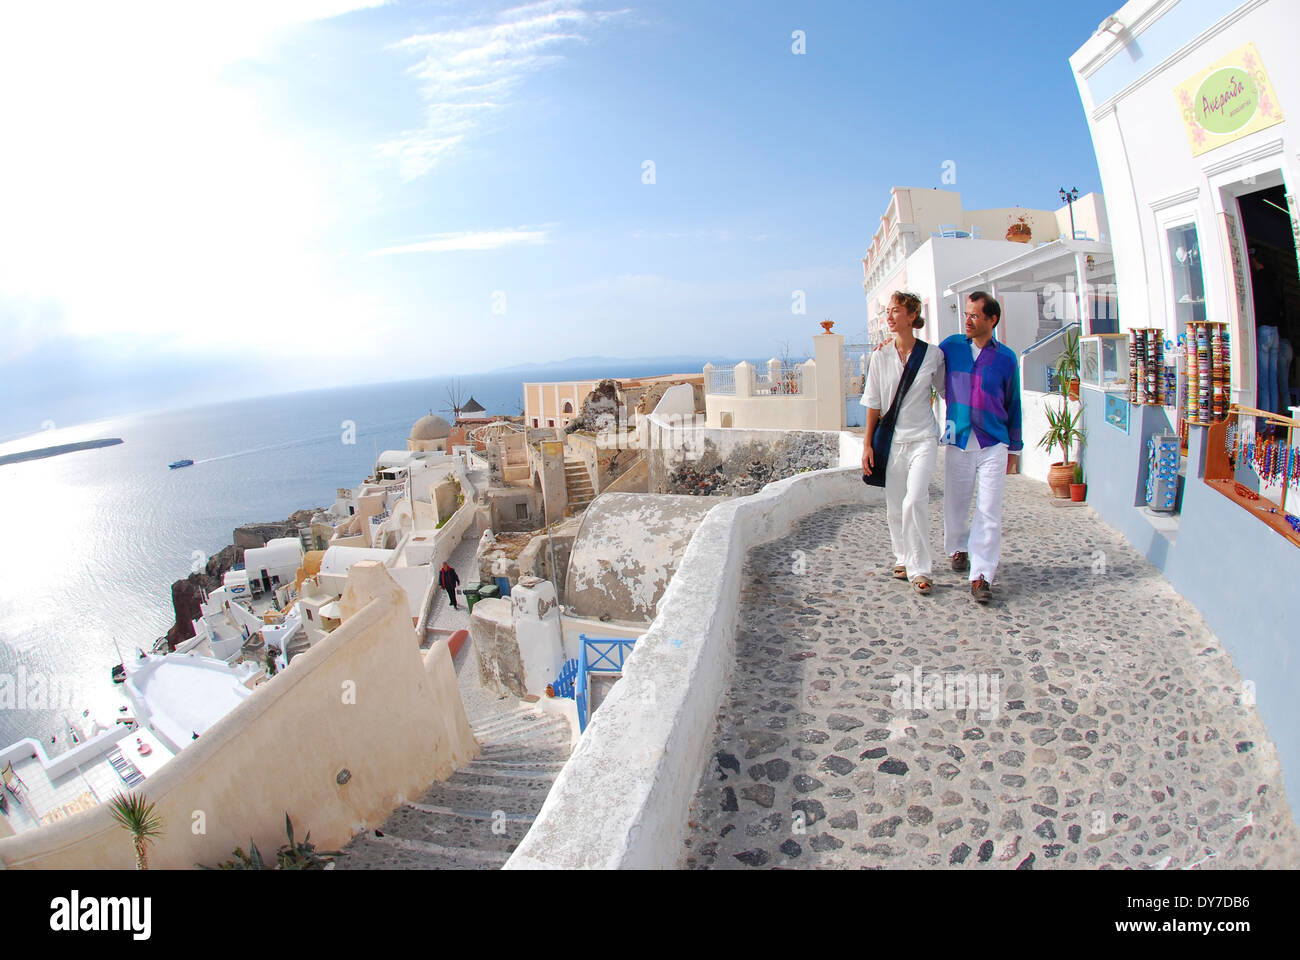 A couple strolling past a storefont and enjoying the view in Oia, Santorini, Greece. Stock Photo